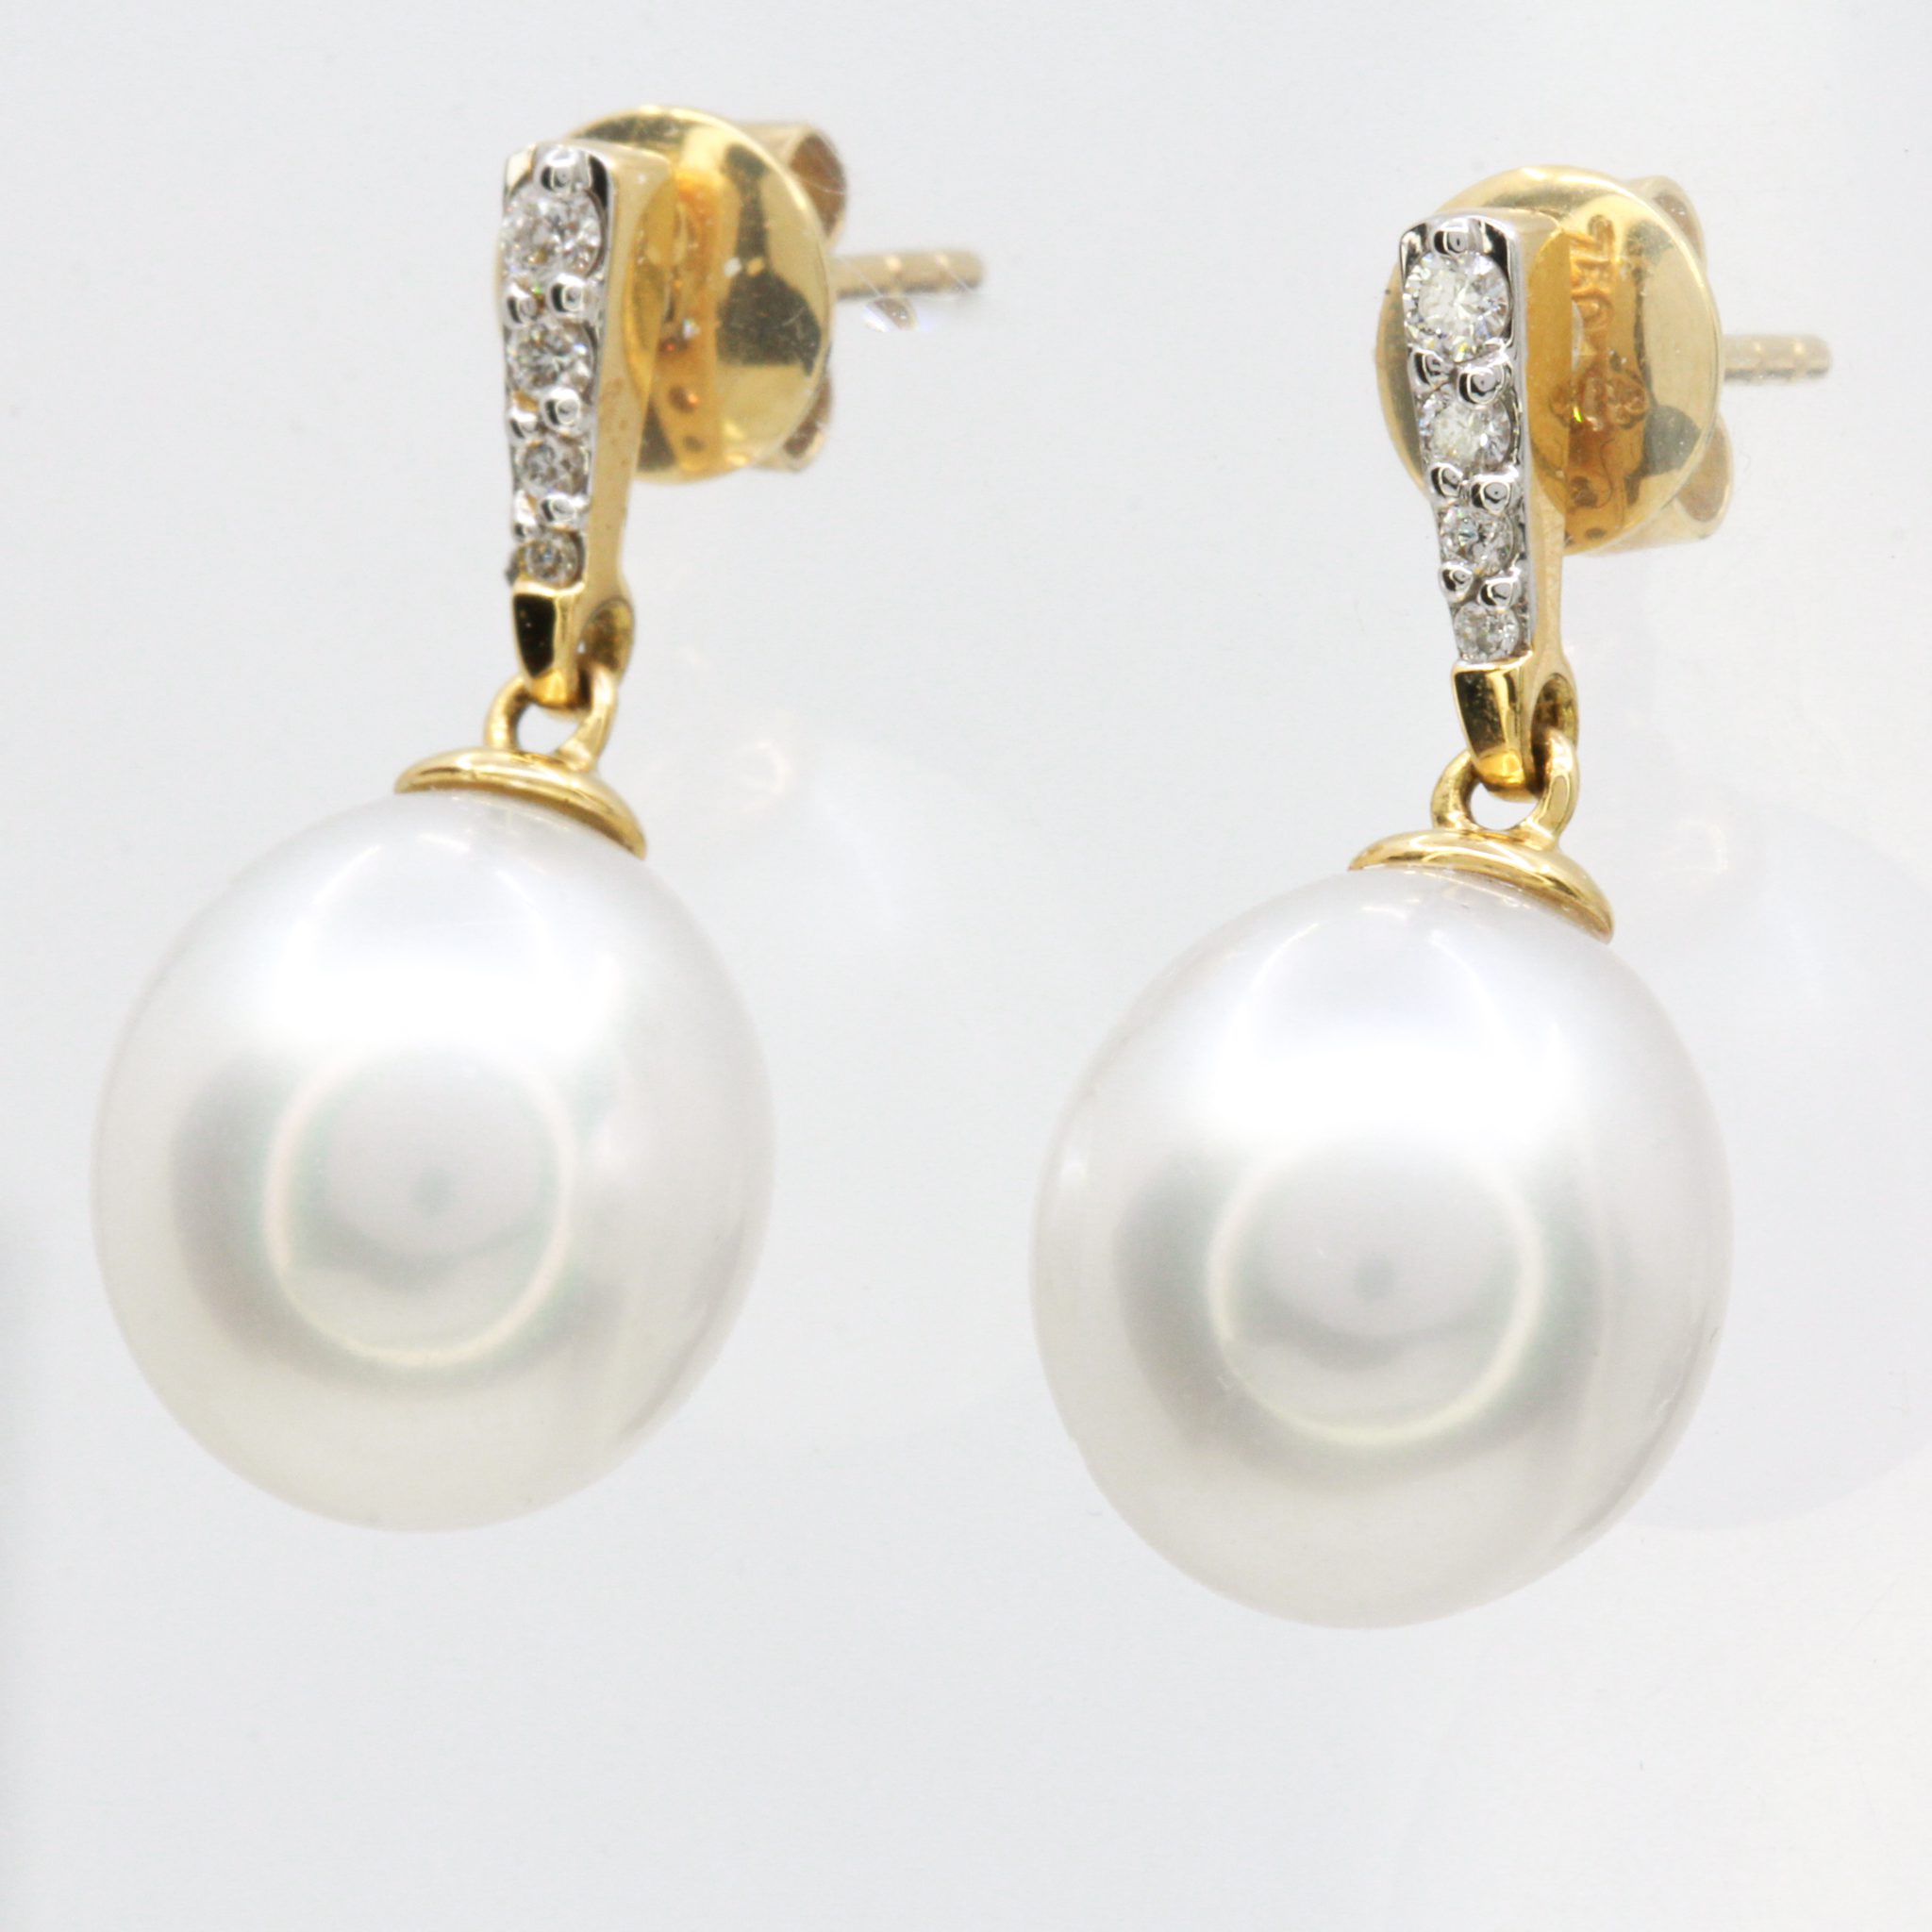 18ct Yellow Gold White South Sea Pearl and Diamond Earrings | Allgem ...